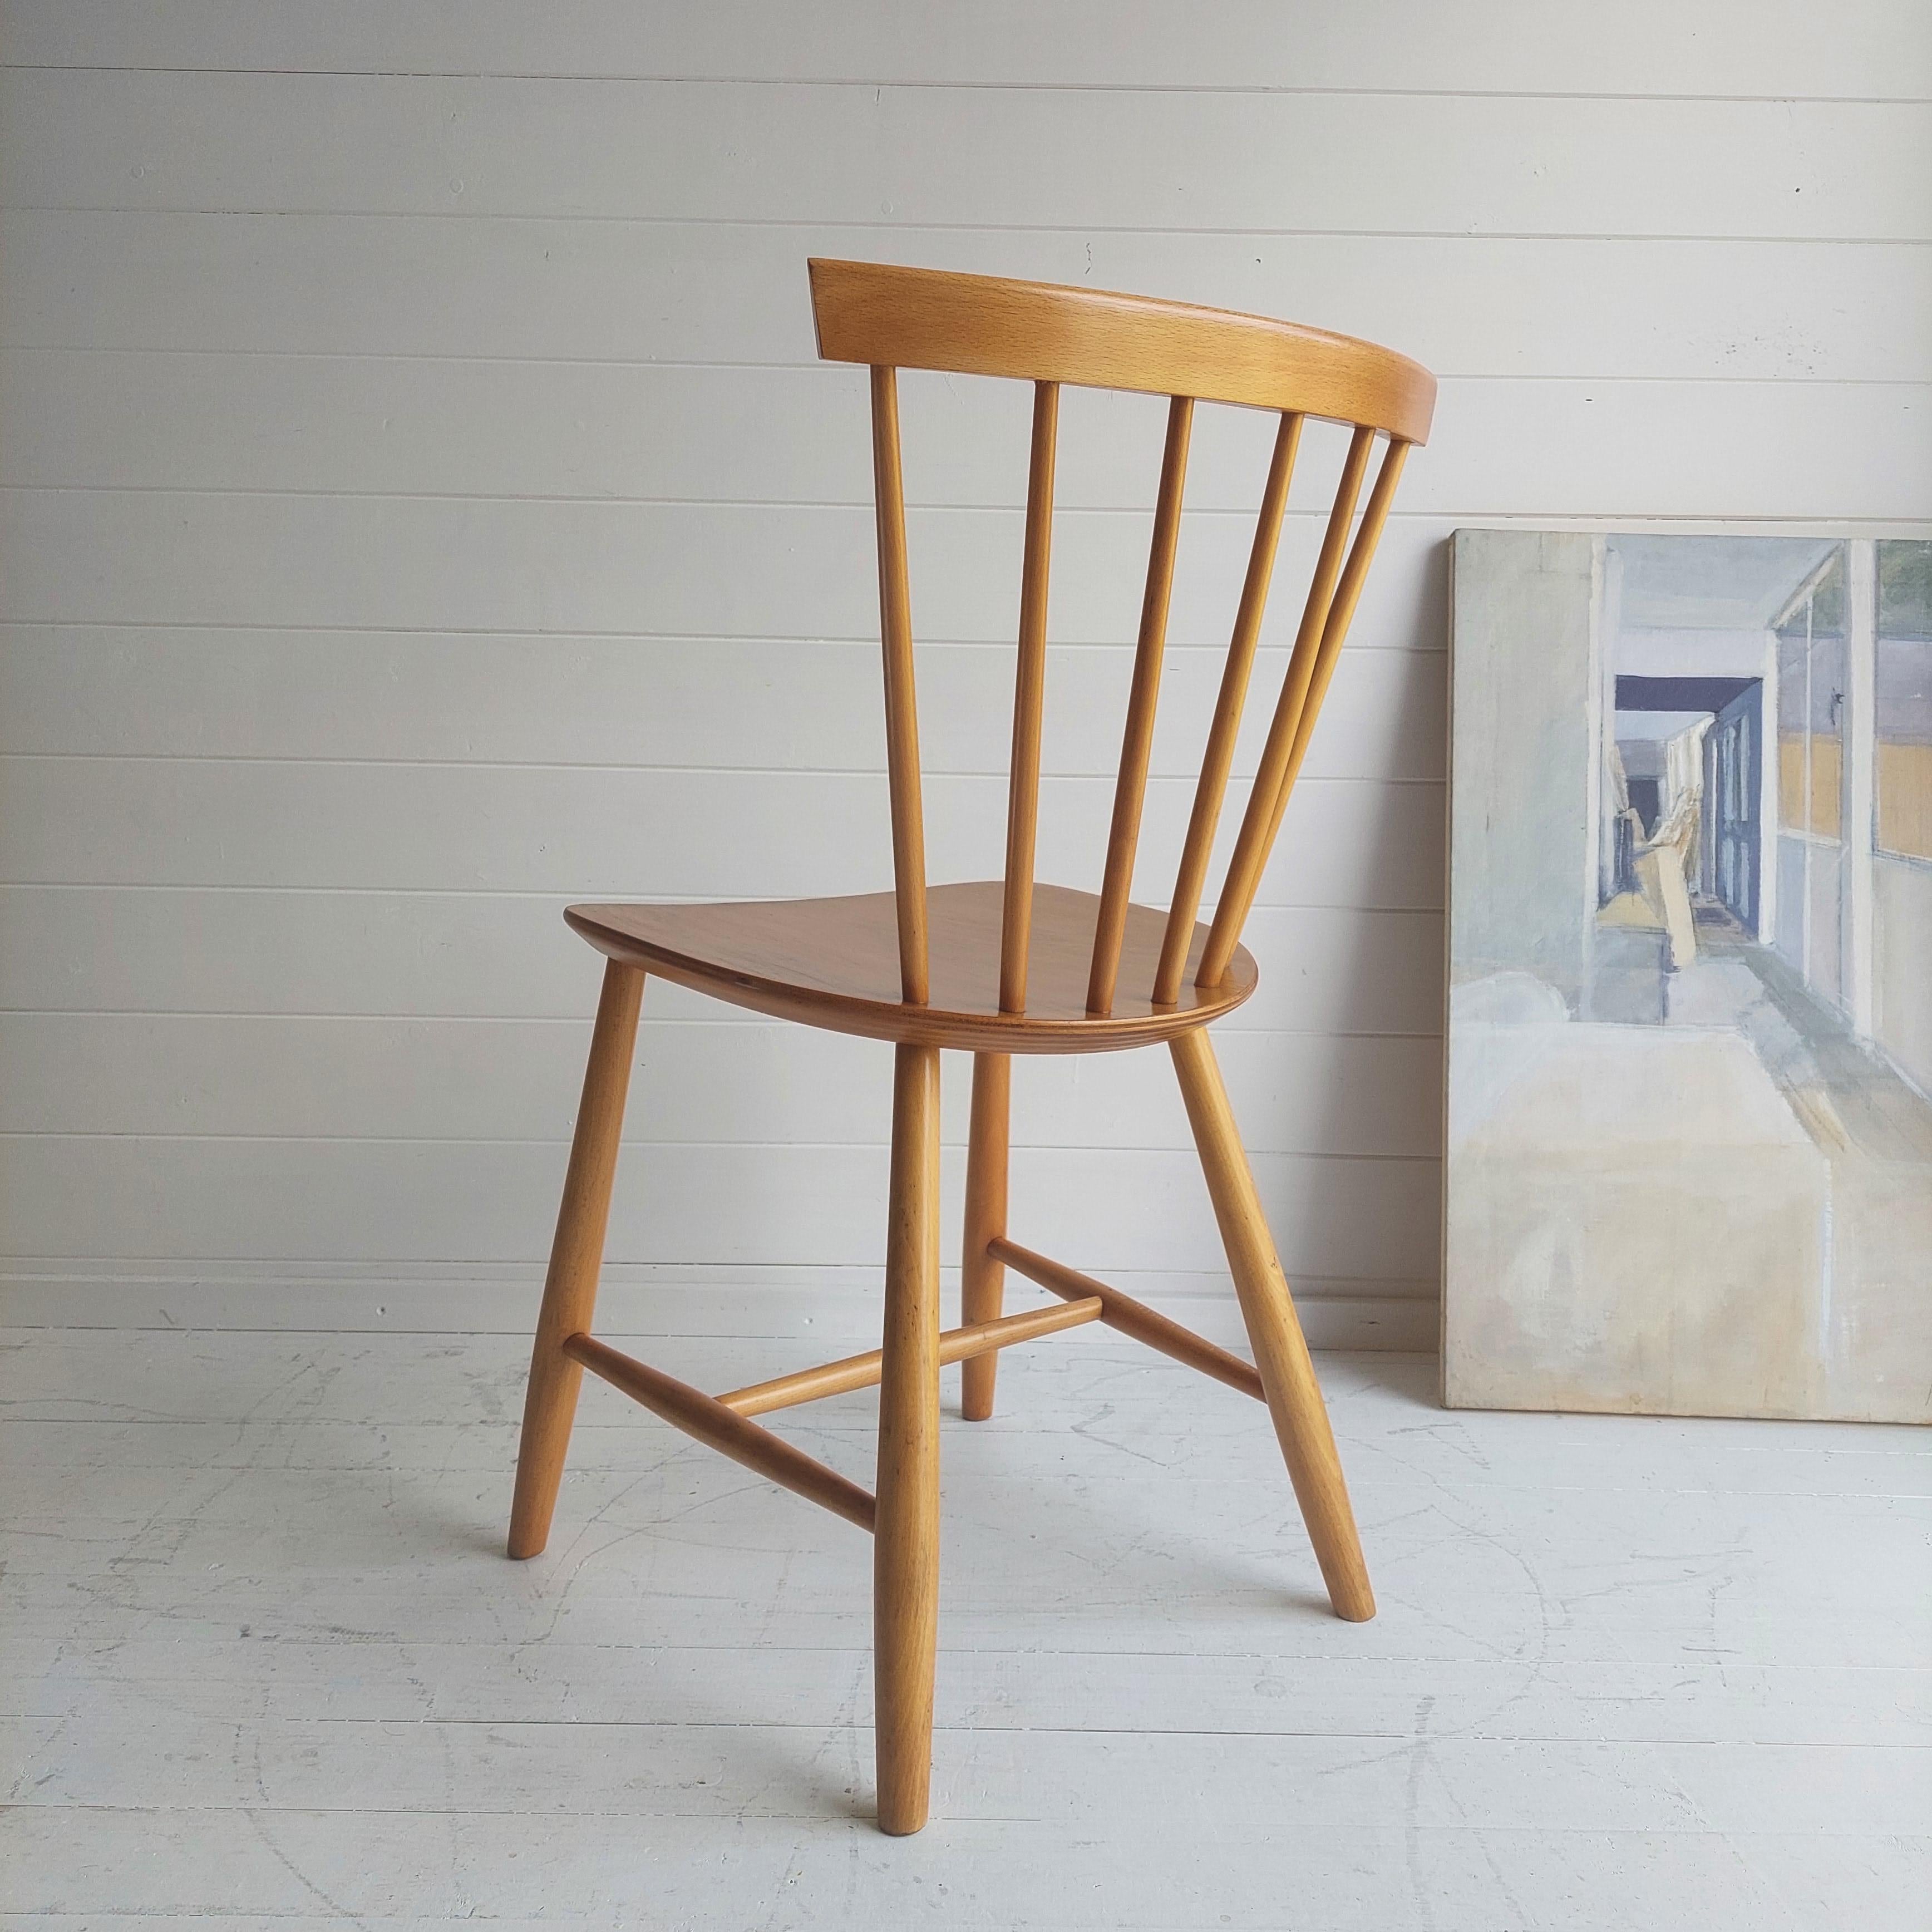 Scandinavian Modern Mid Century J46 Dining Kitchen Chair by Poul Volther for Fdb, Denmark, 1960s